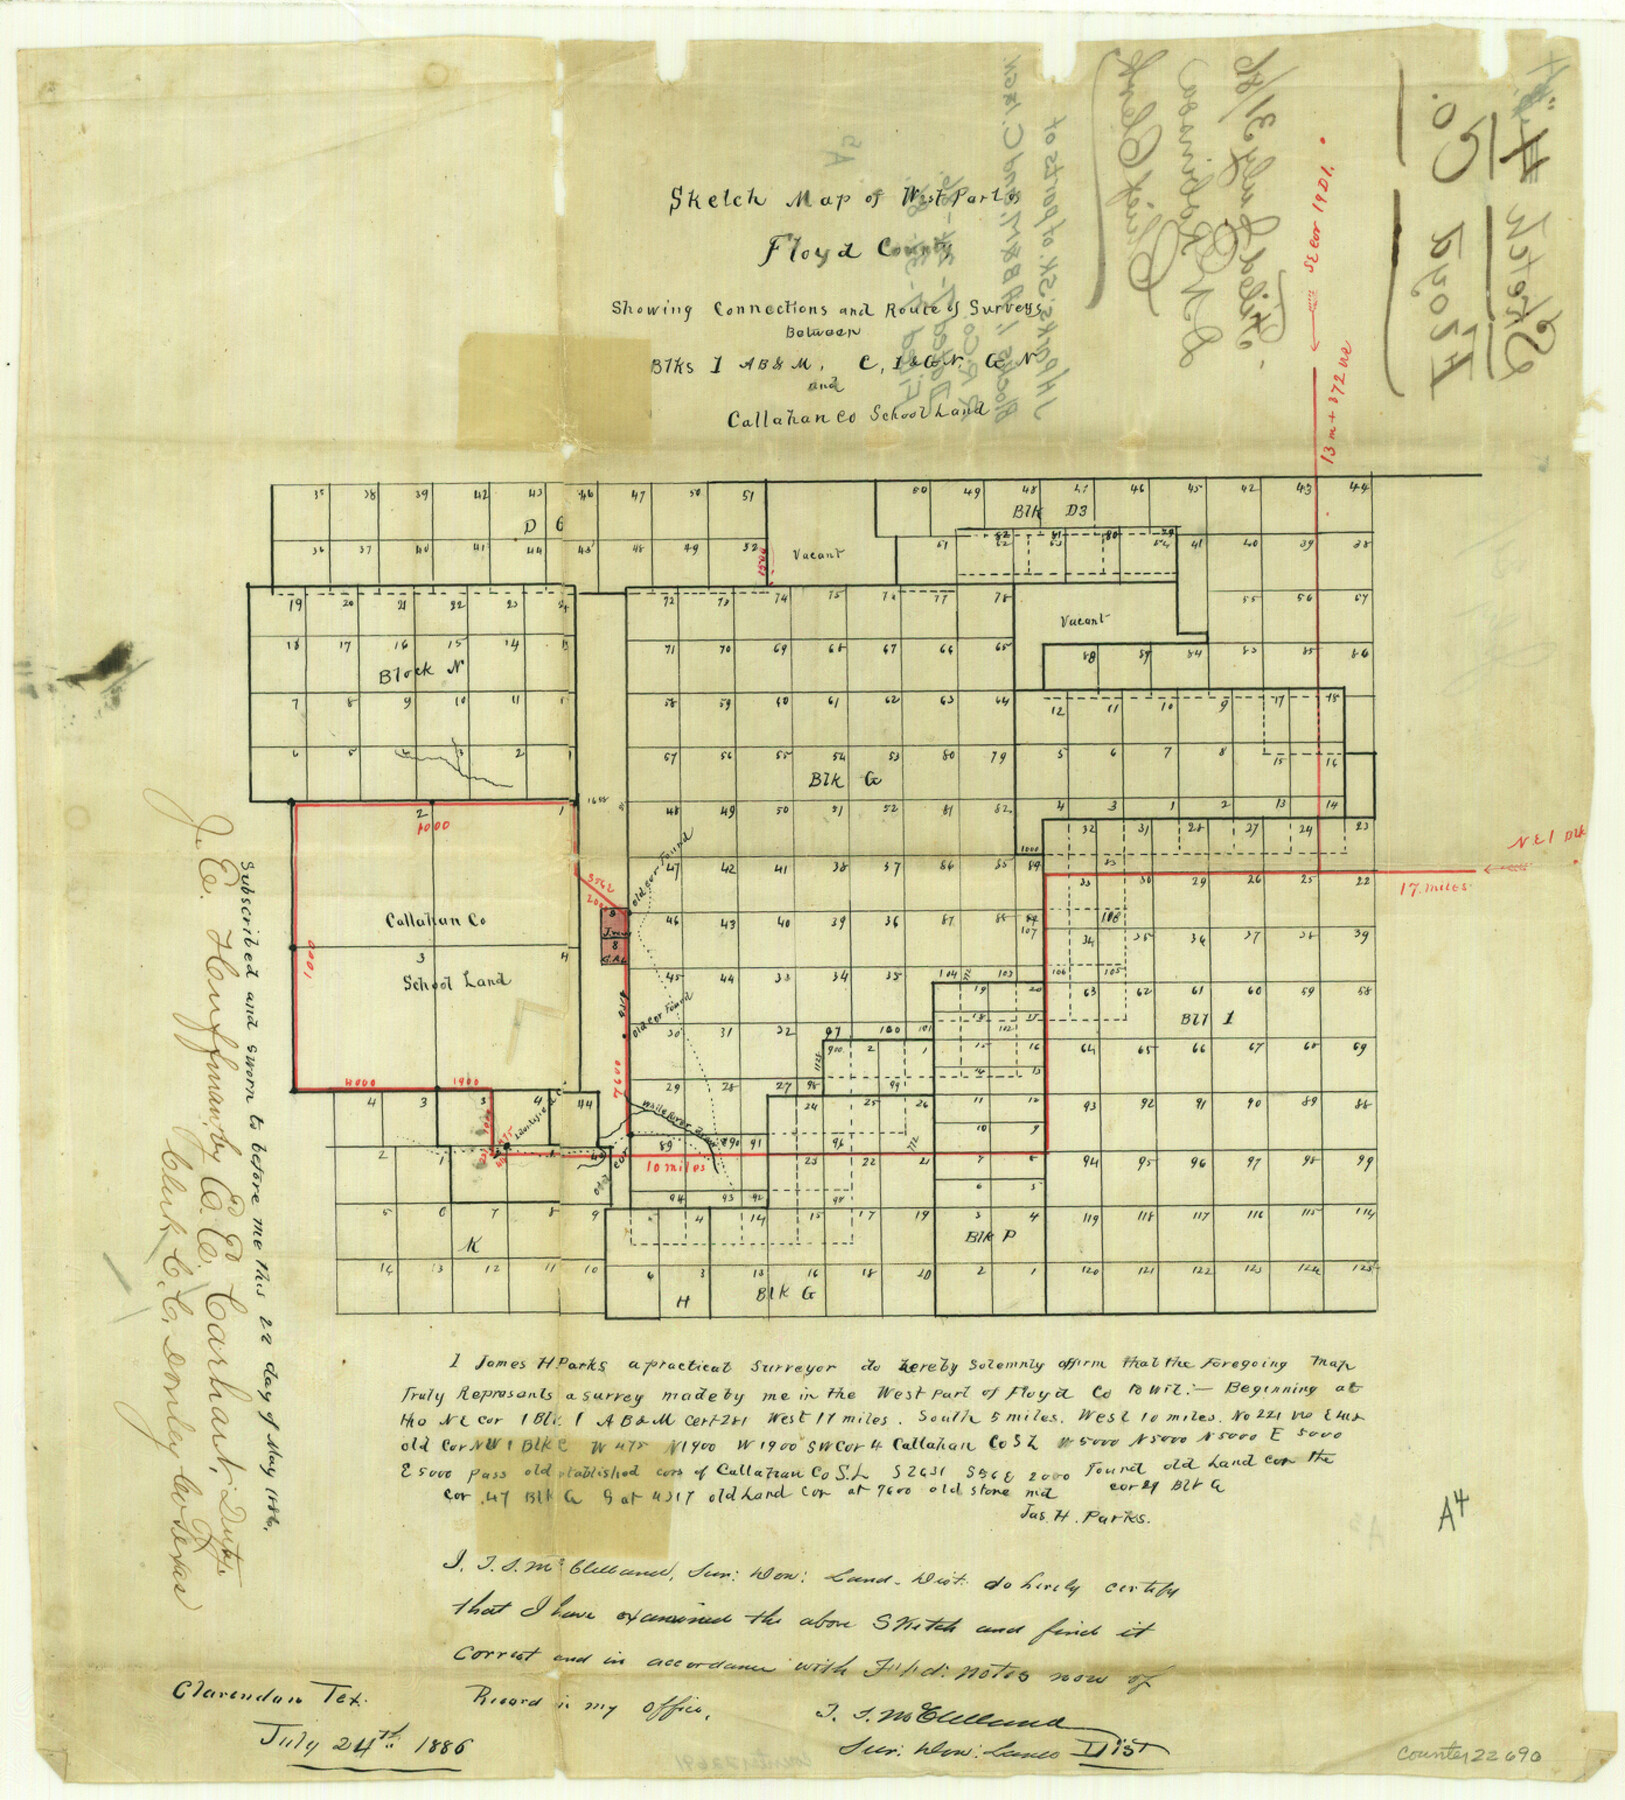 22690, Floyd County Sketch File 4, General Map Collection